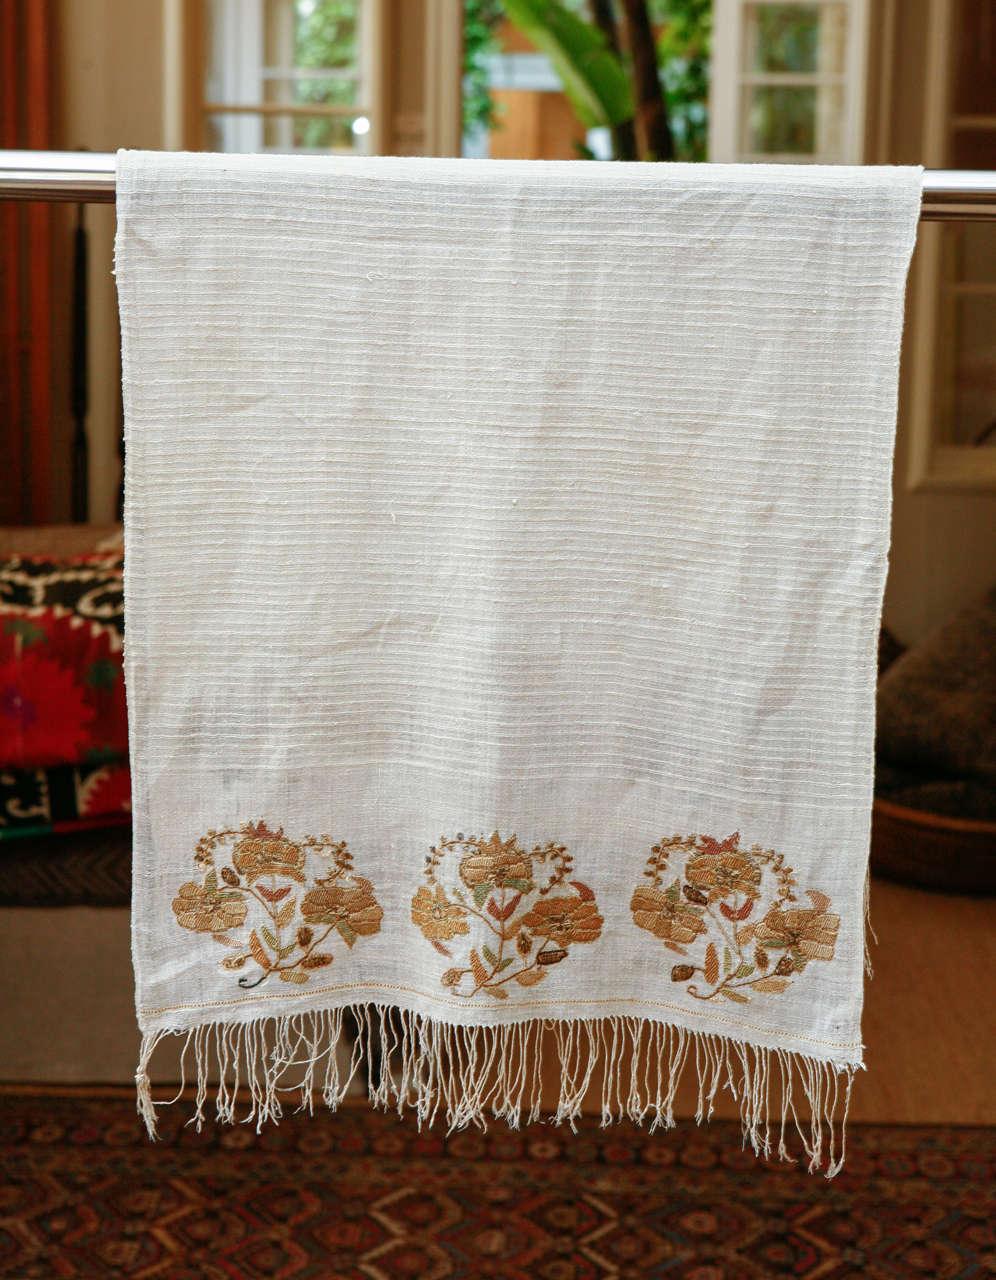 20th Century Ottoman Turkish Embroidered Towels 